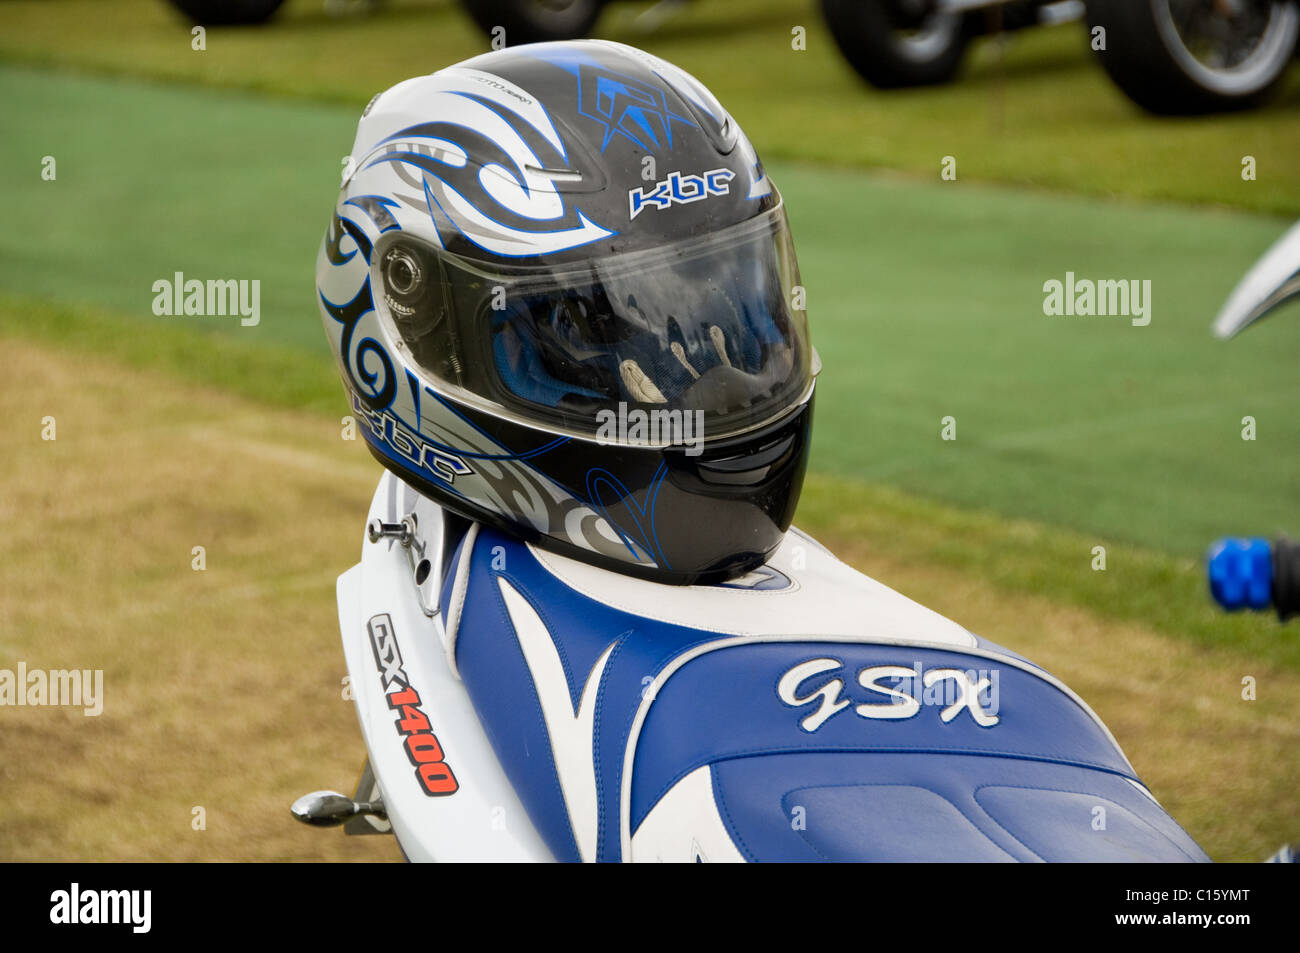 KBC helmet on the back of a GSX 1400 motorcycle Stock Photo - Alamy